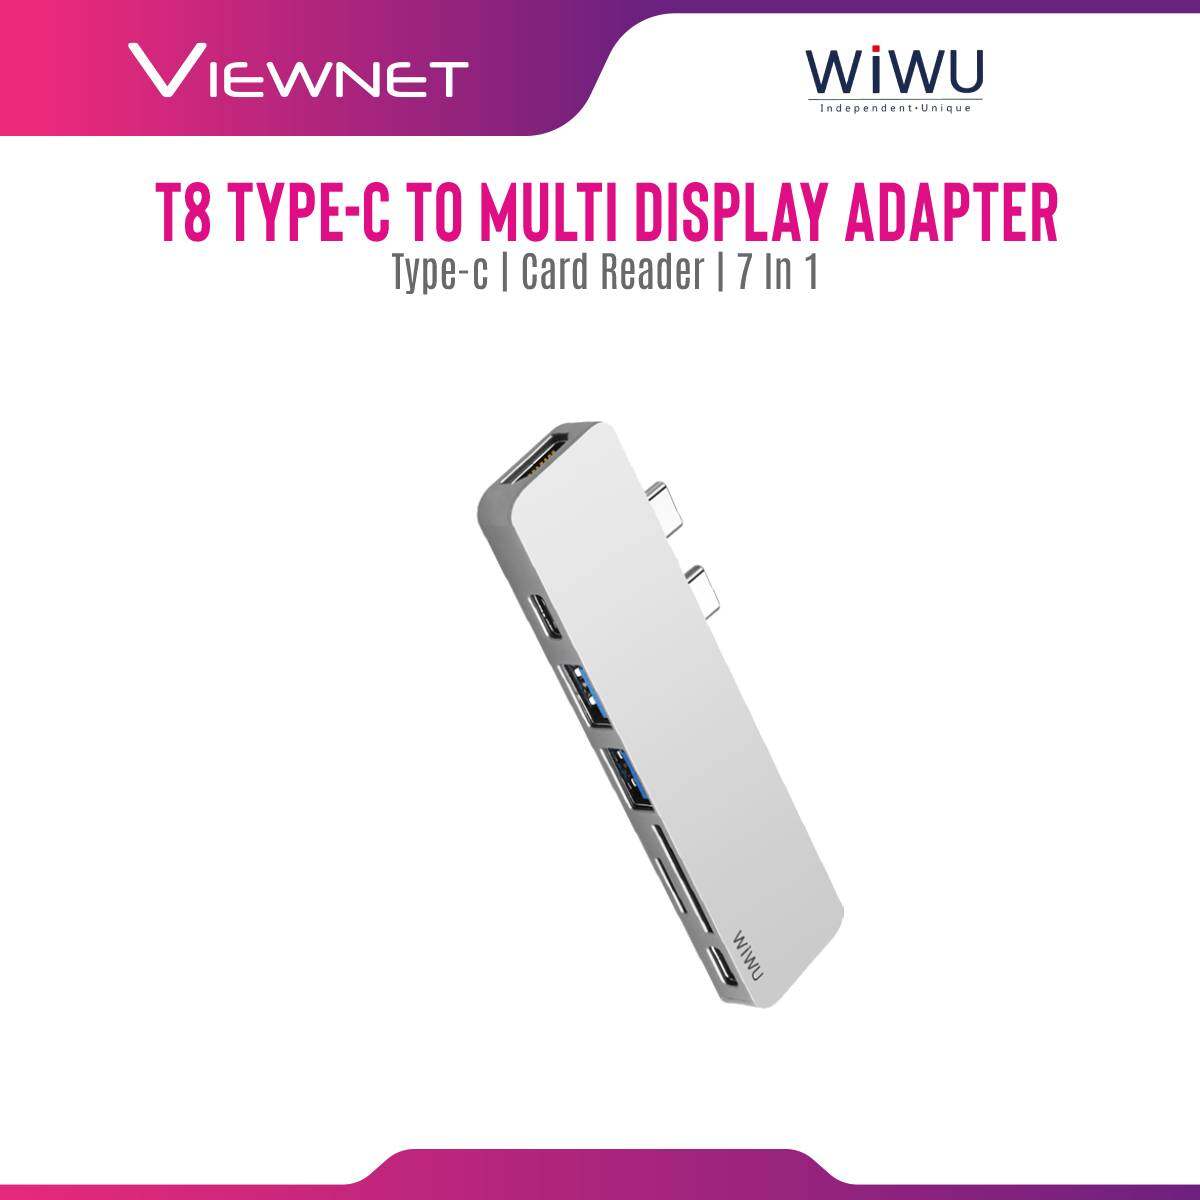 Wiwu T8 Type-c to Usb 3.0 Silver Aluminum Alloy Usb 3.0 Connector Type-C Hub Adapter